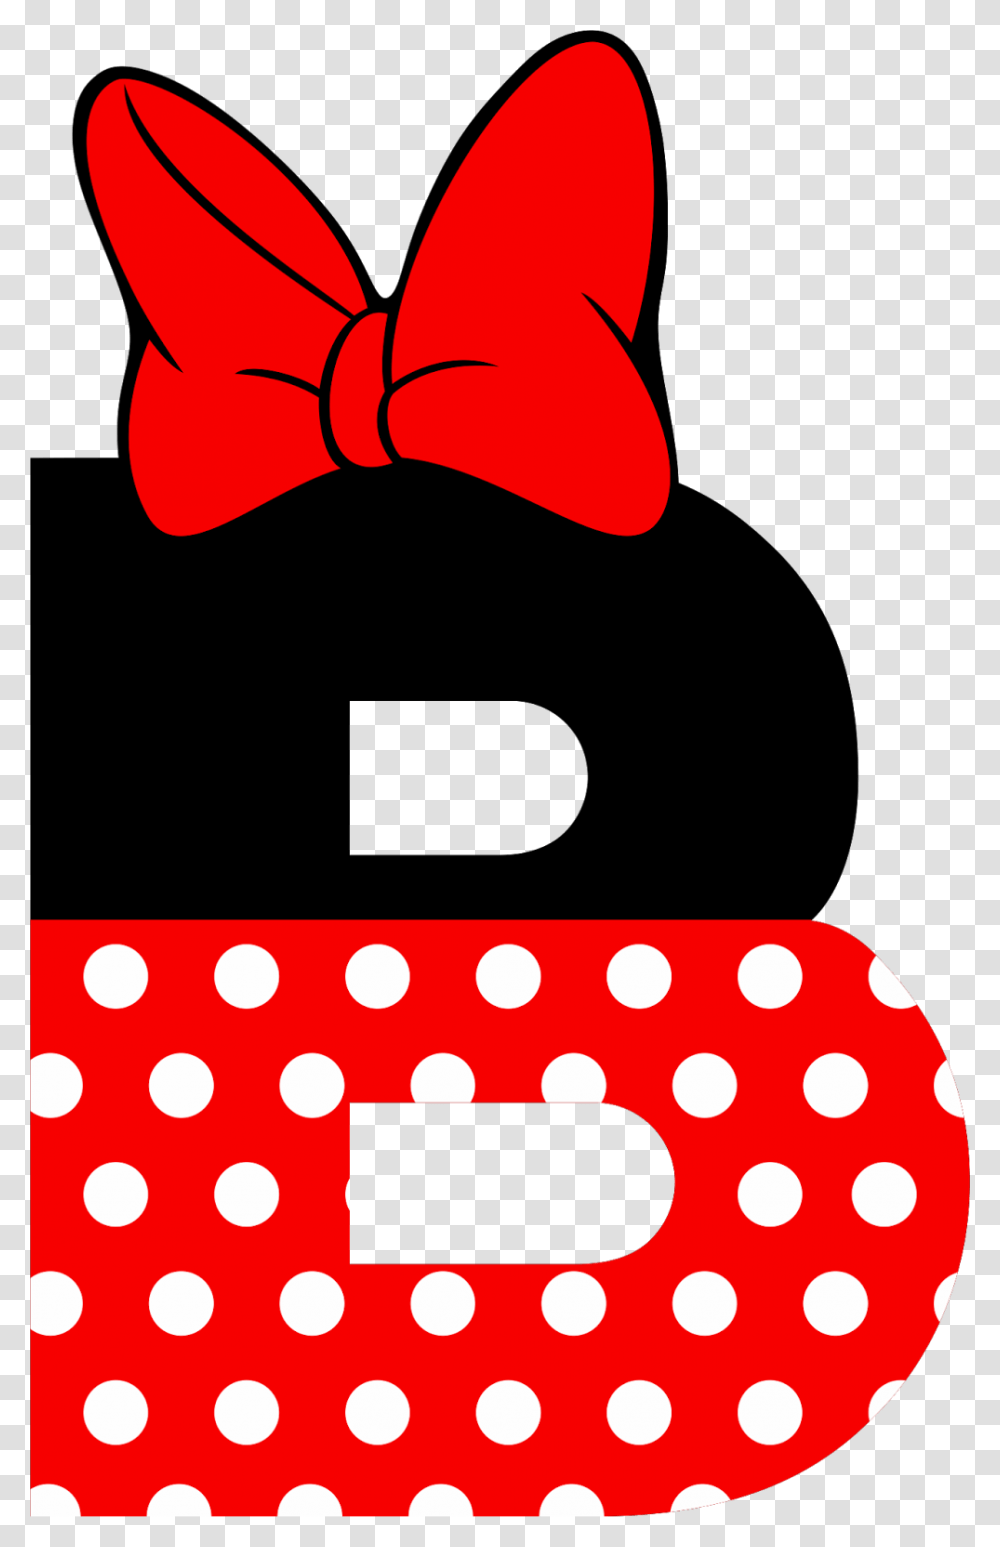 Pin By Merie Annalyn Aguilar On 1st Amp 2nd Birthday Minnie Mouse Alphabet Letters, Tie, Accessories, Accessory, Texture Transparent Png